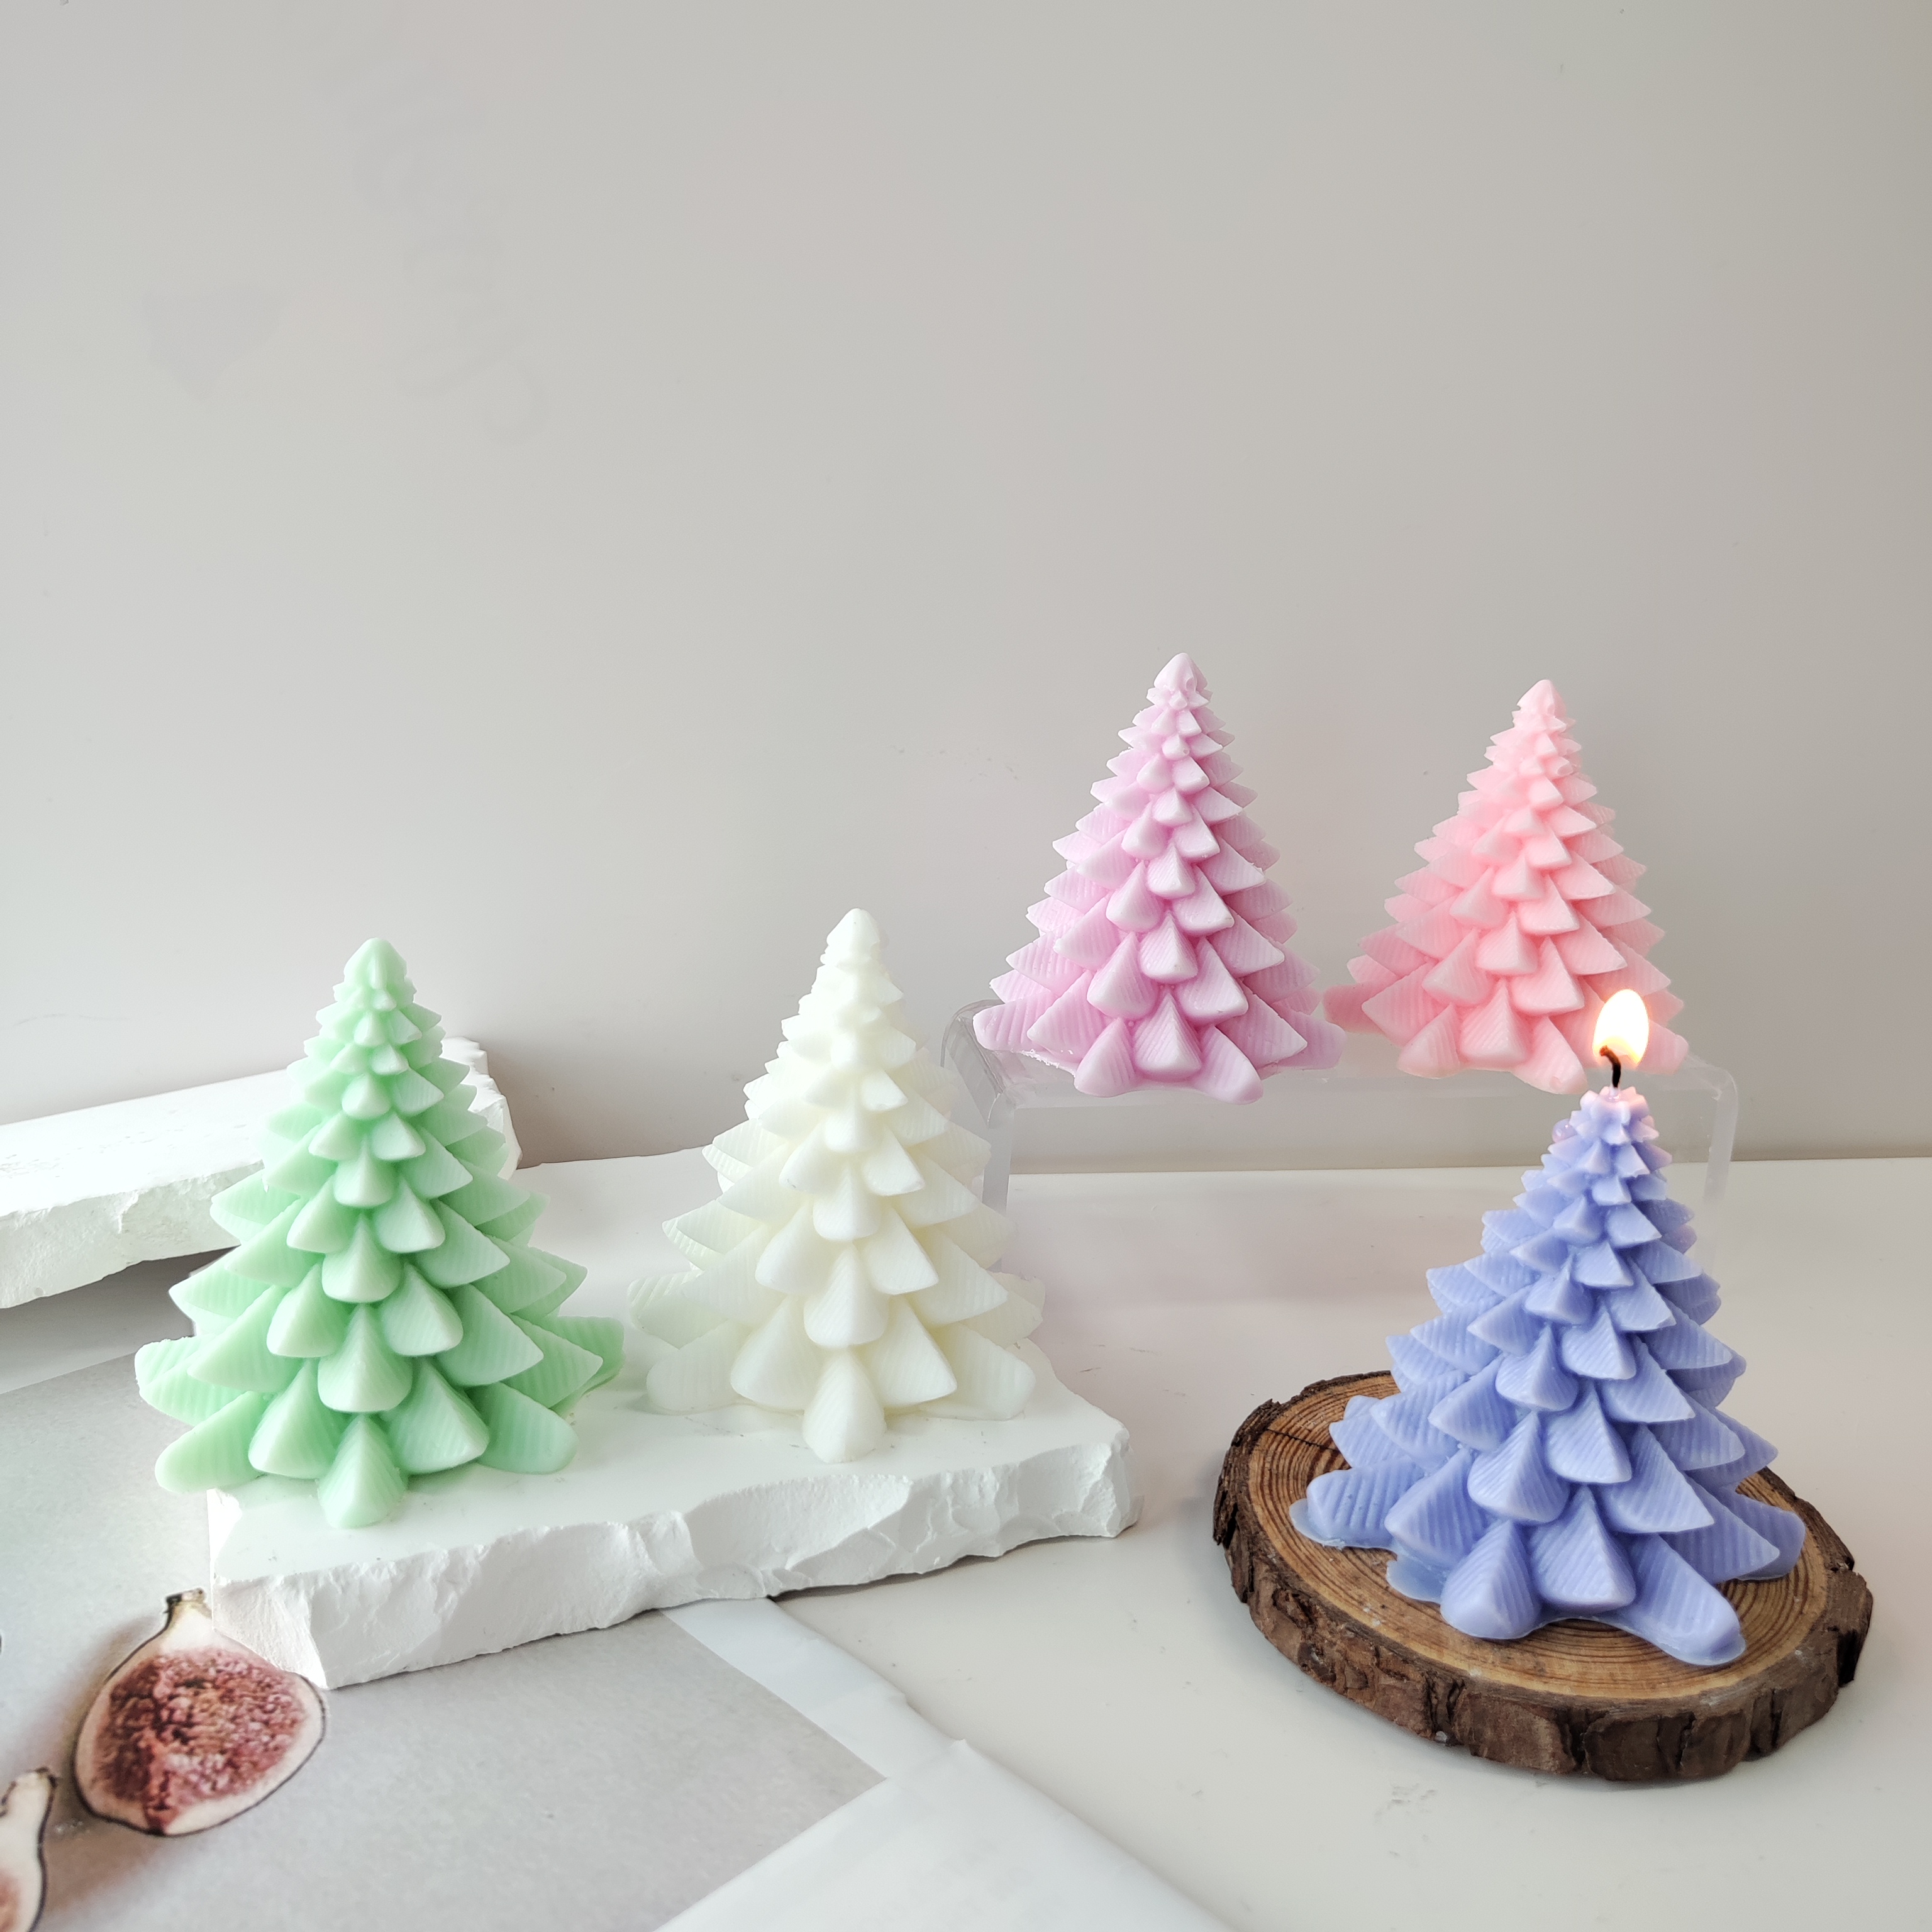 J56 Wholesale Christmas Gift Home Dekorasyon Desktop Crafts Pine Shaped Candles Christmas Tree Scented Candle